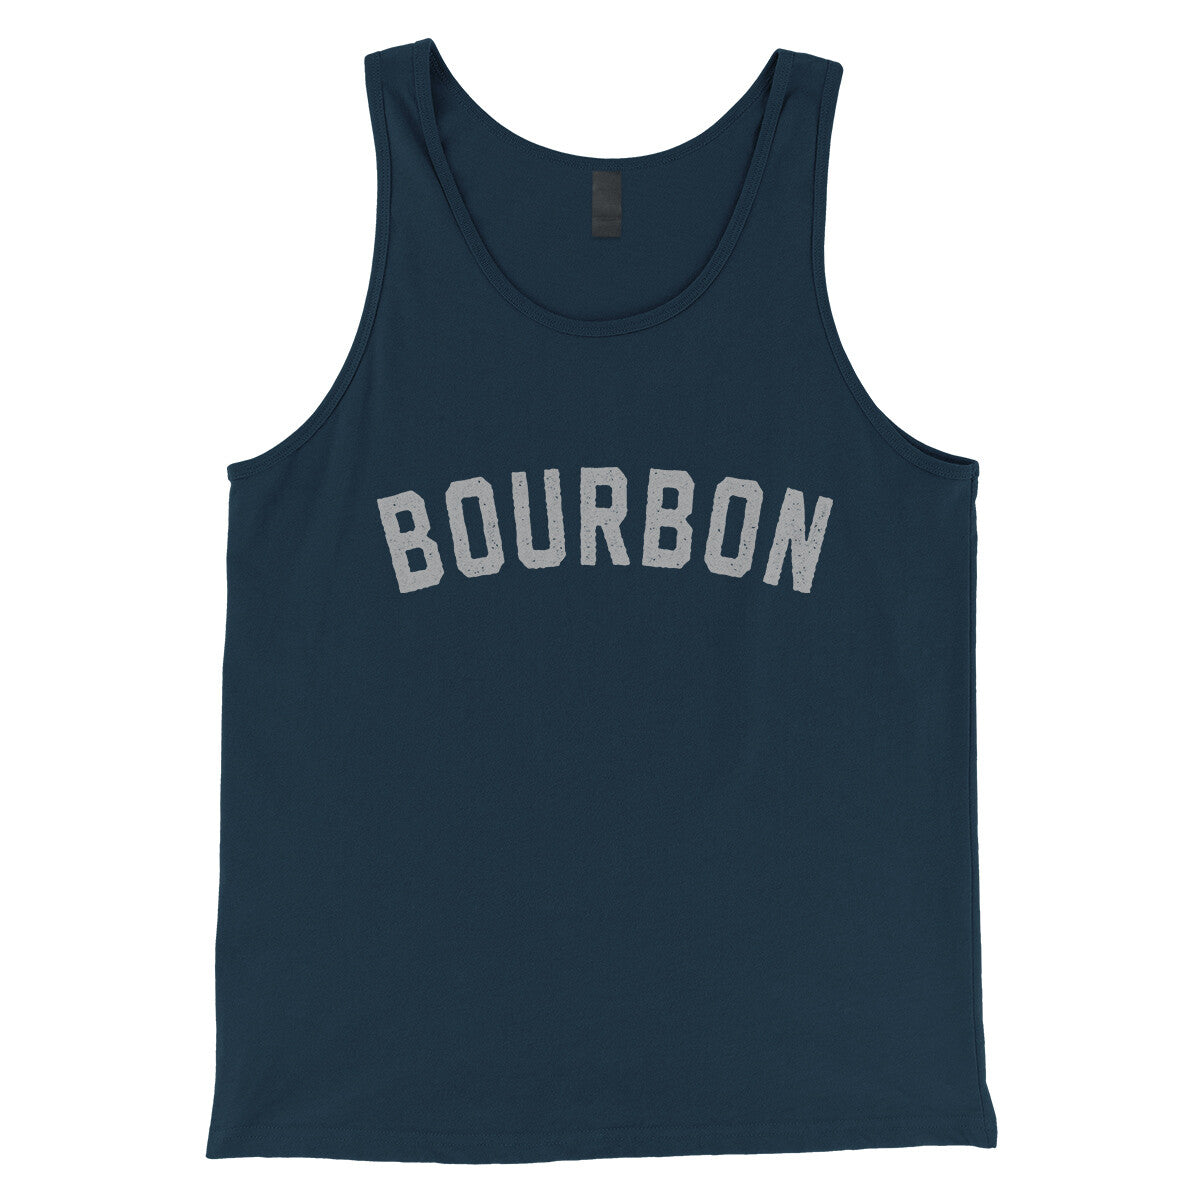 Bourbon in Navy Color